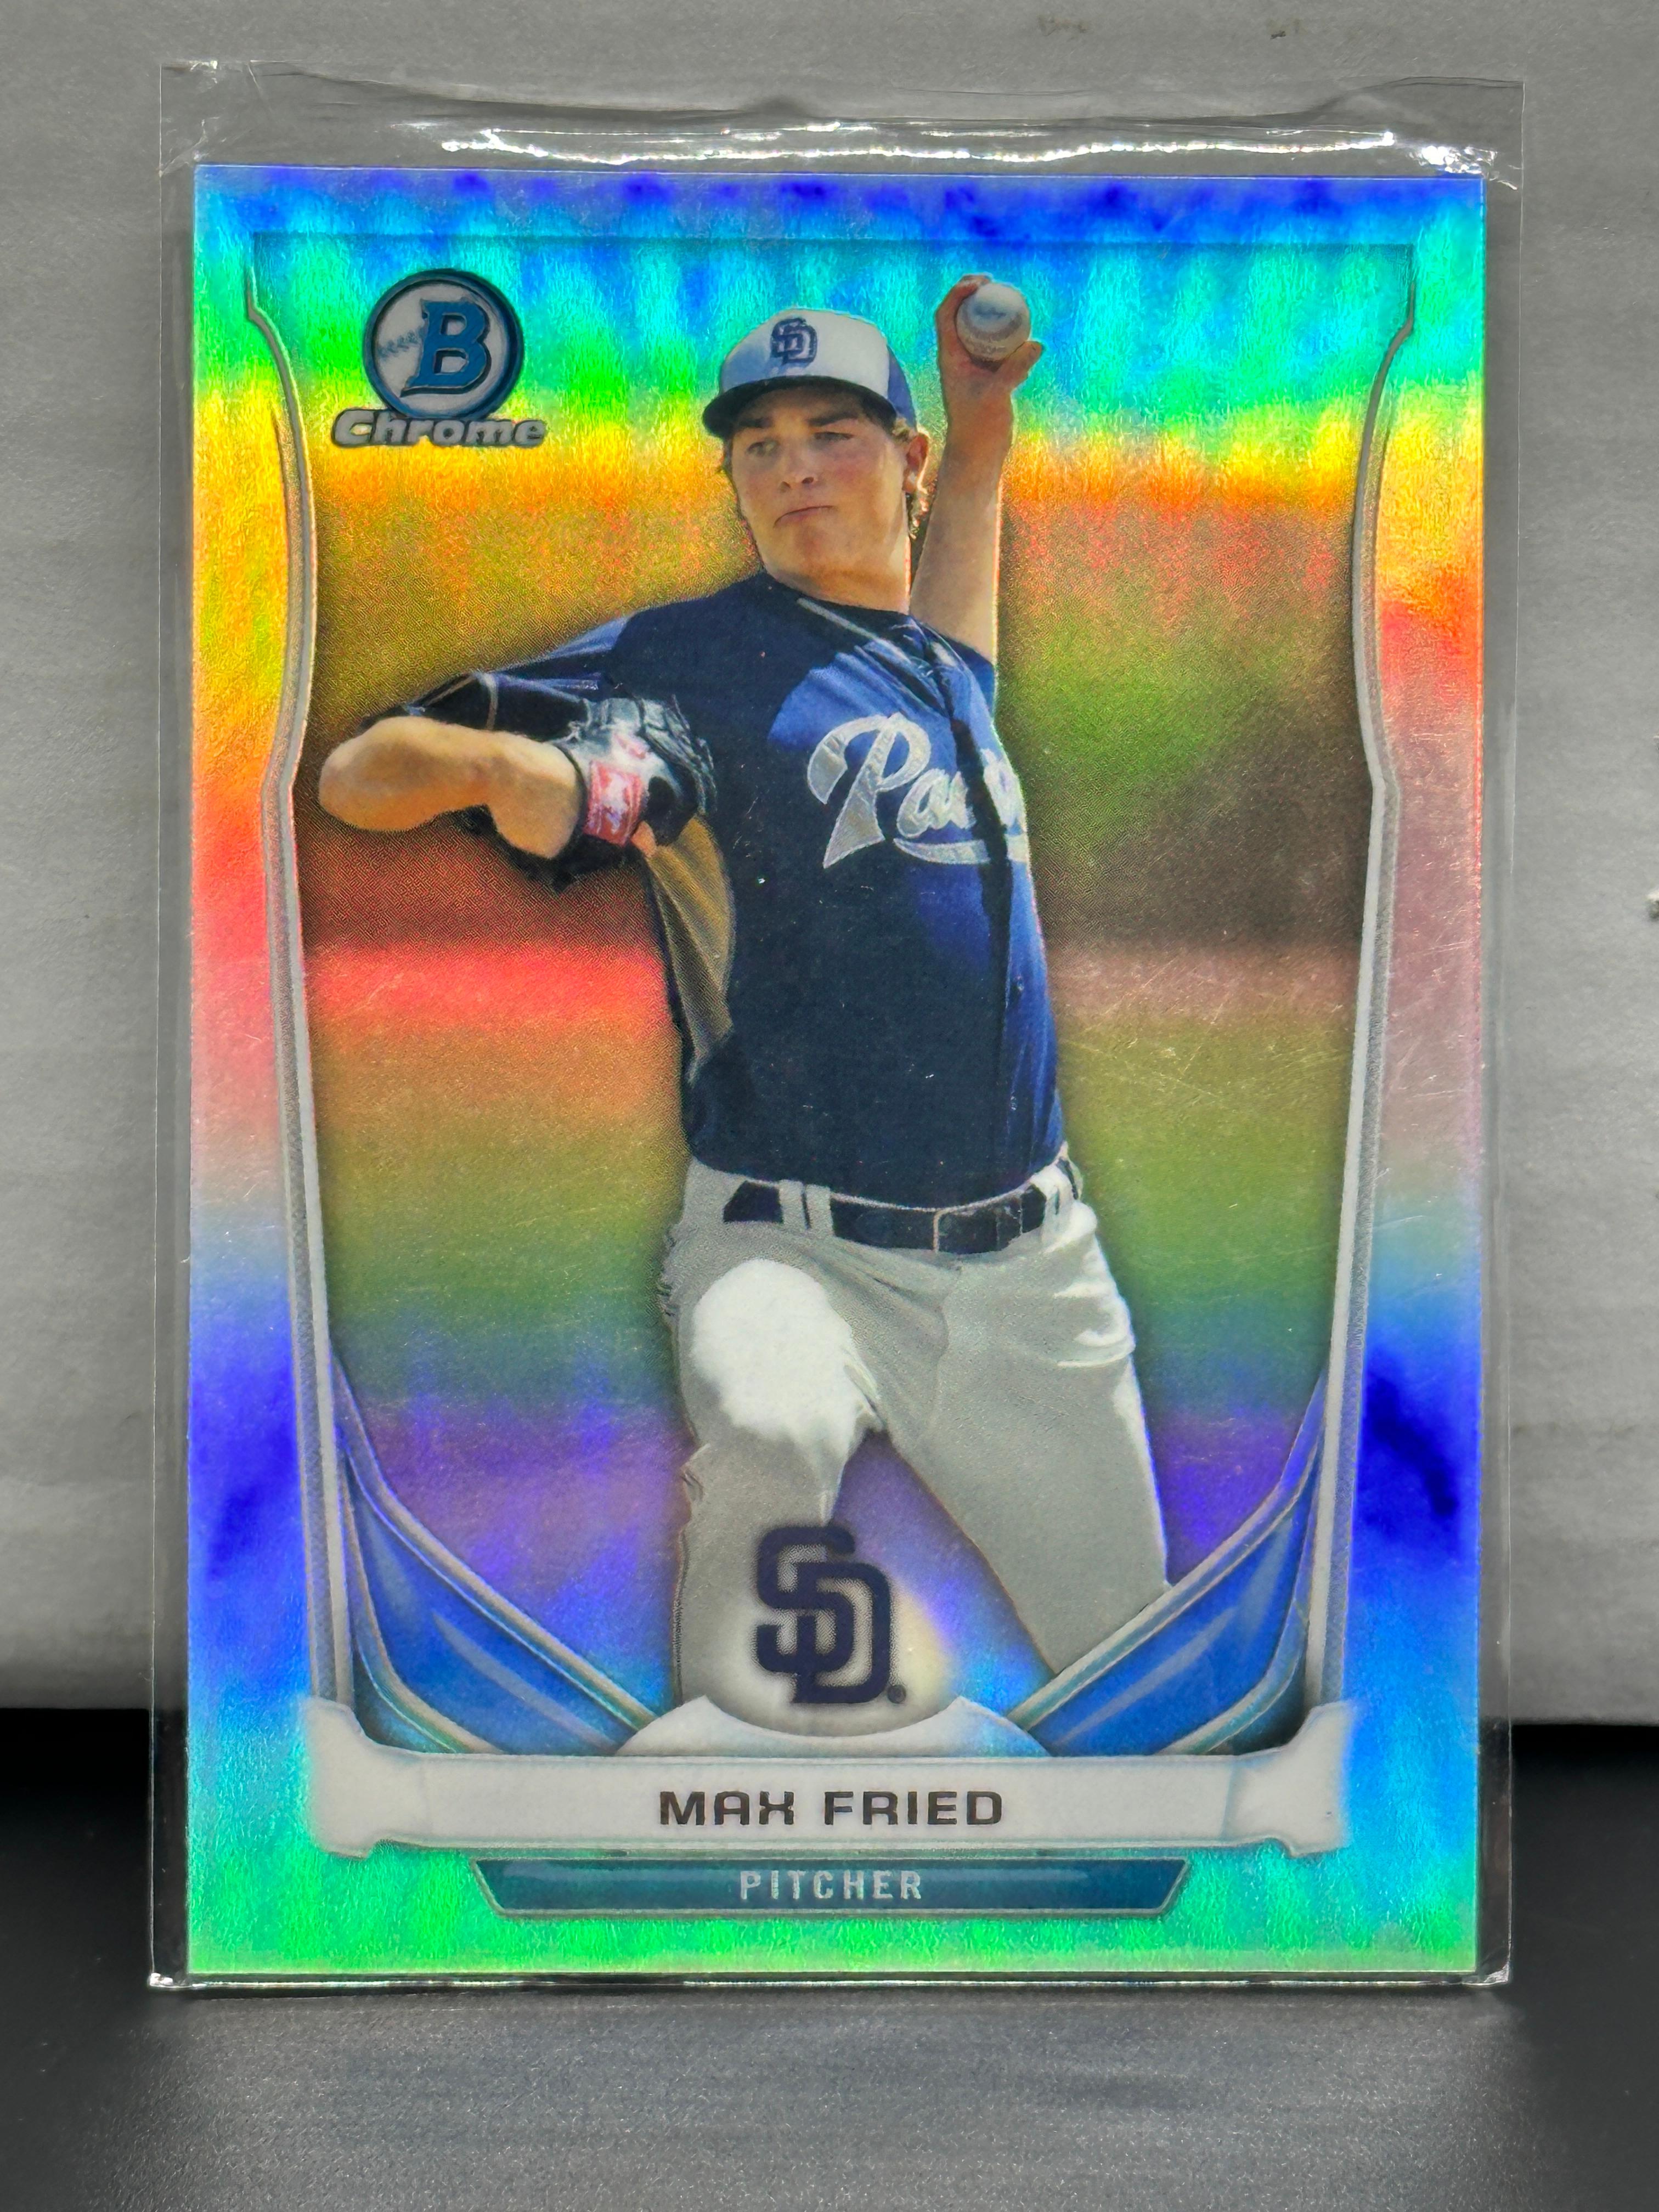 Max Fried 2014 Bowman Chrome Refractor #CTP-8